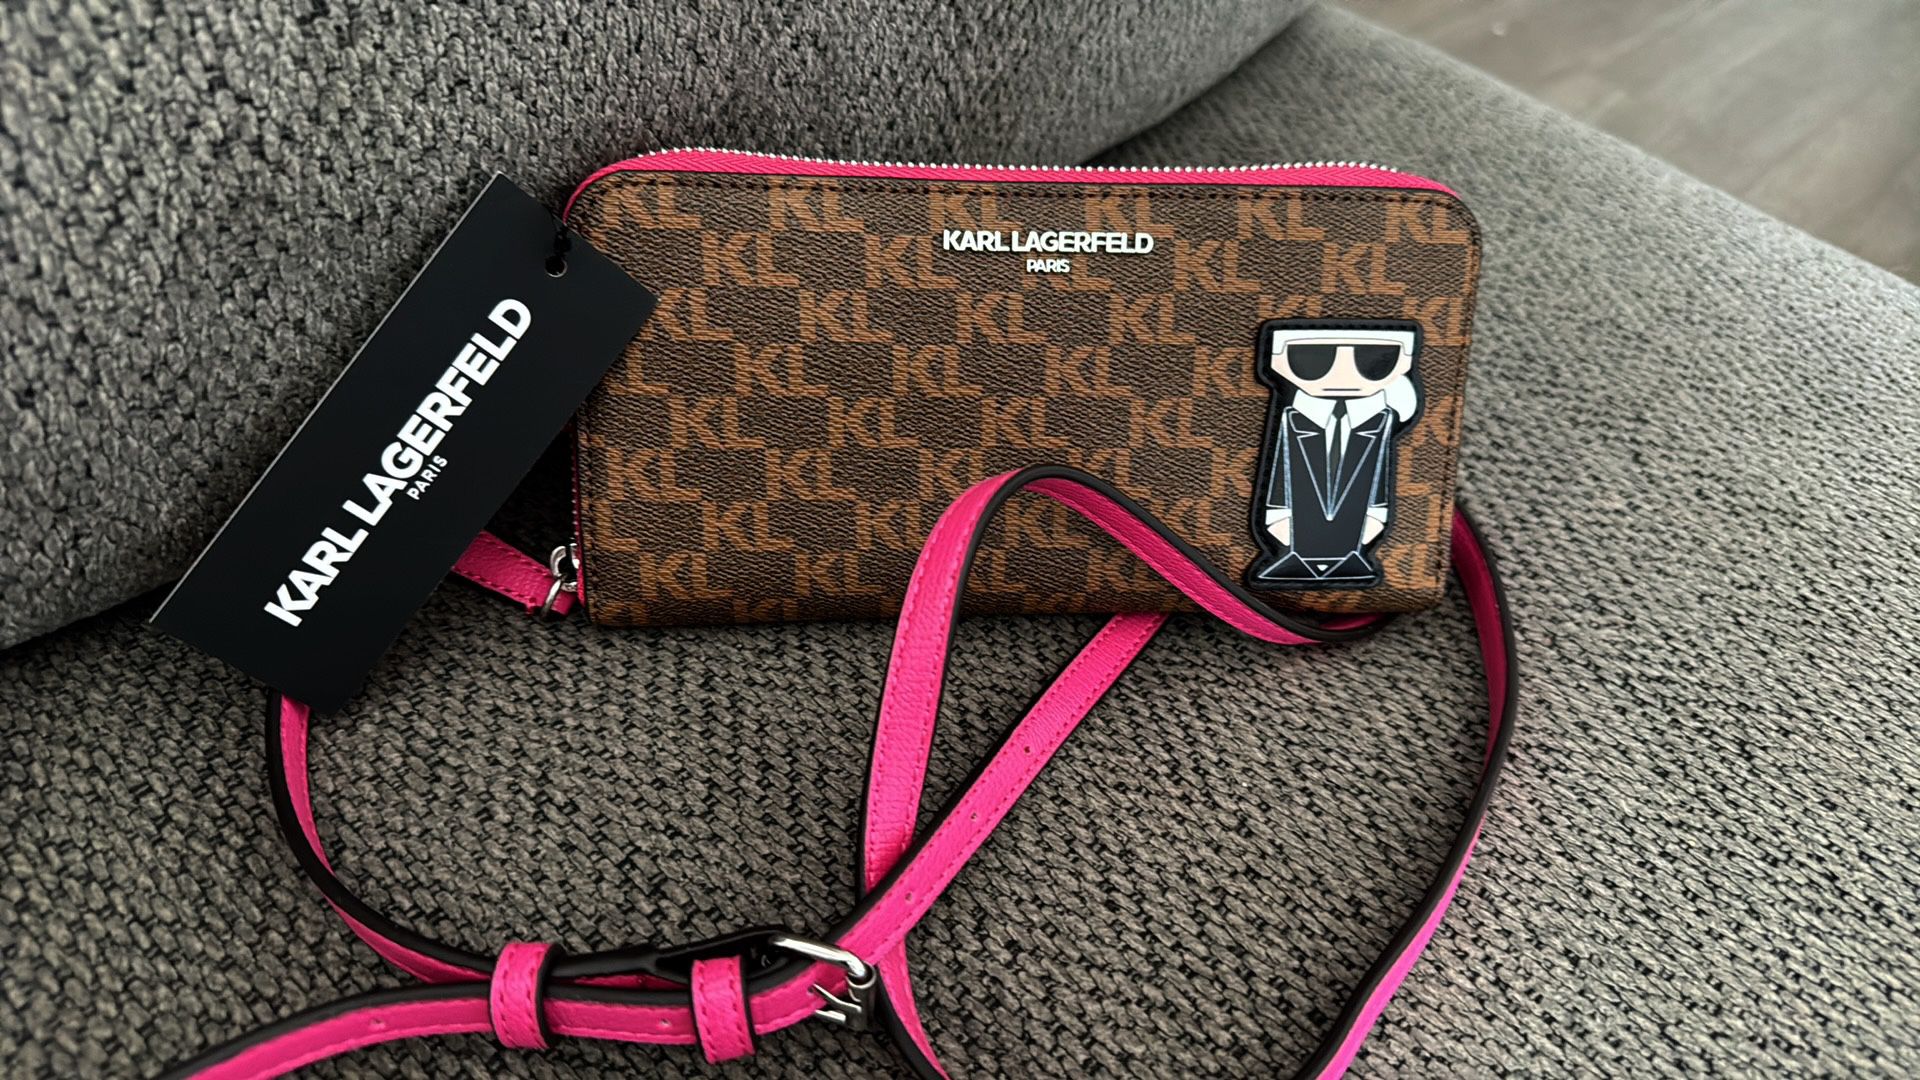 Purse And Wallet 😍